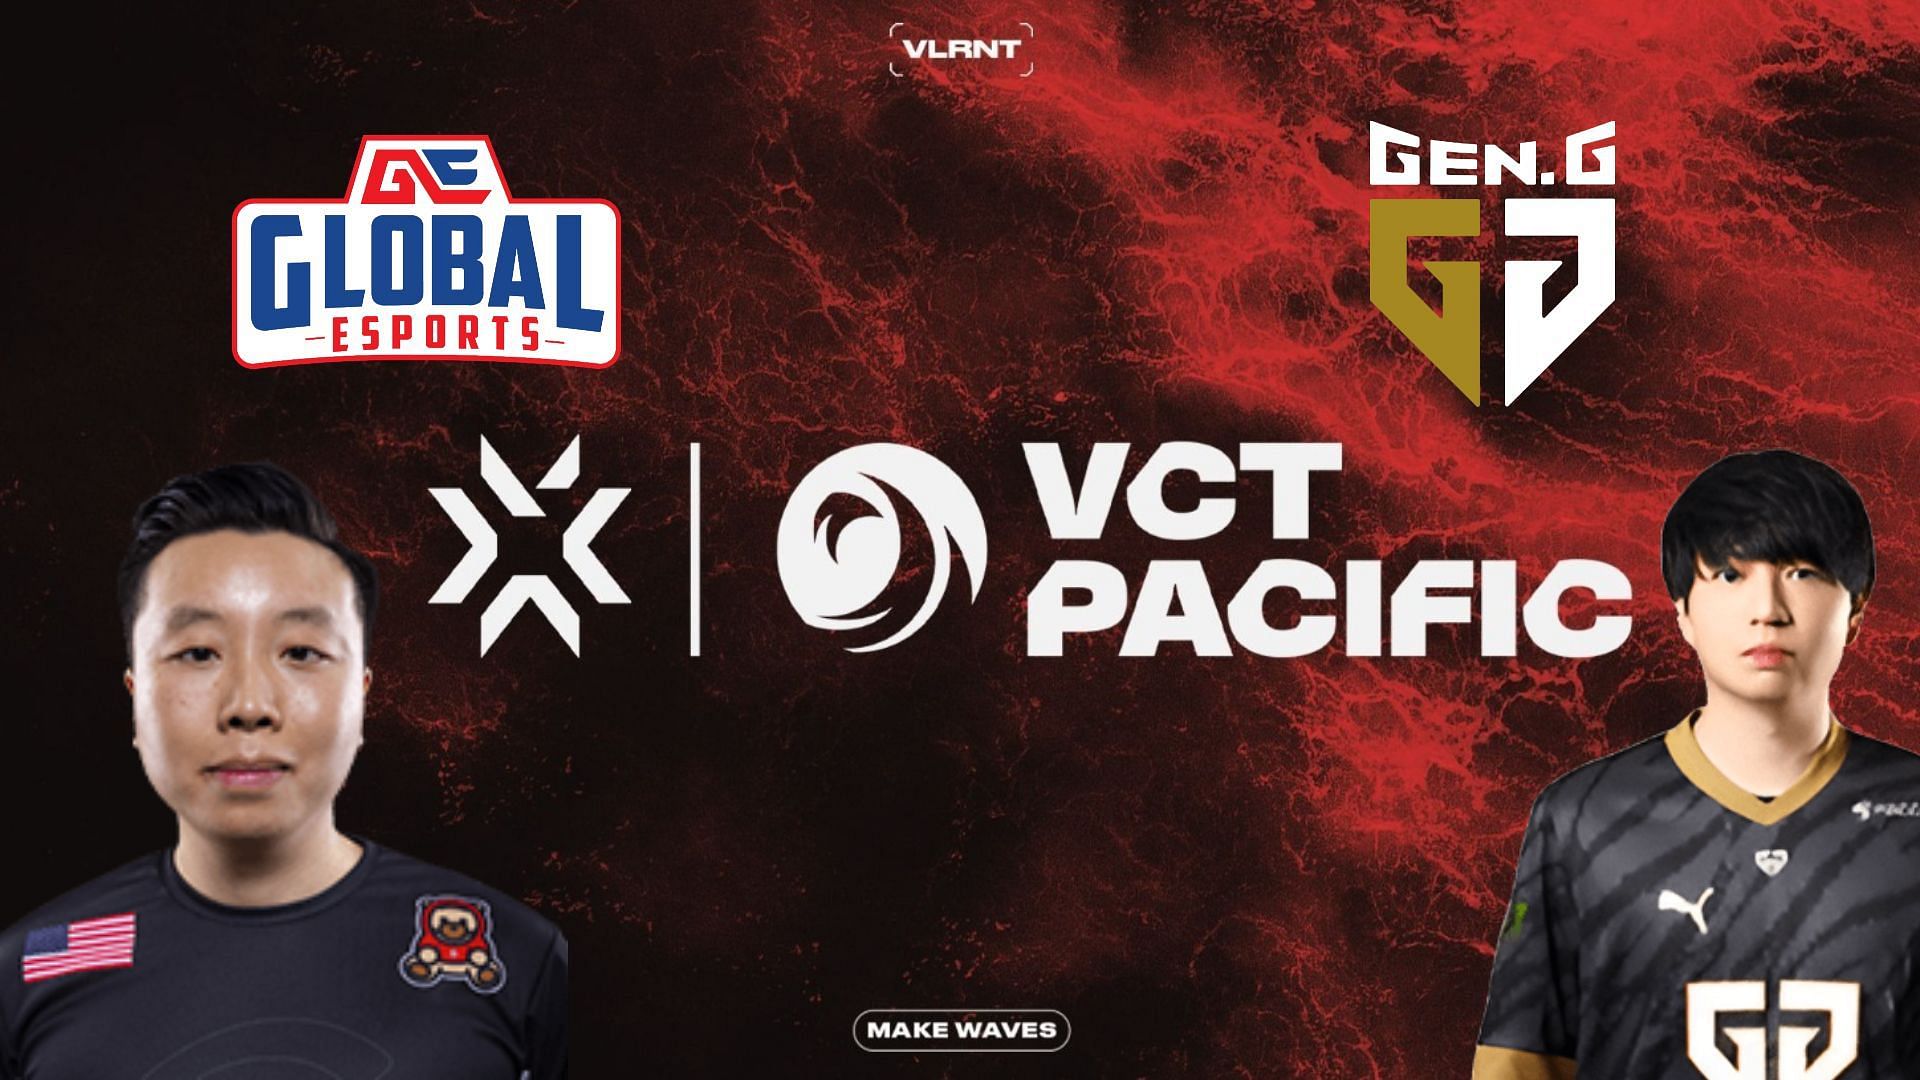 Global Esports vs Gen.G - VCT Pacific League: Predictions, where to watch, and more(image via vlr.gg)